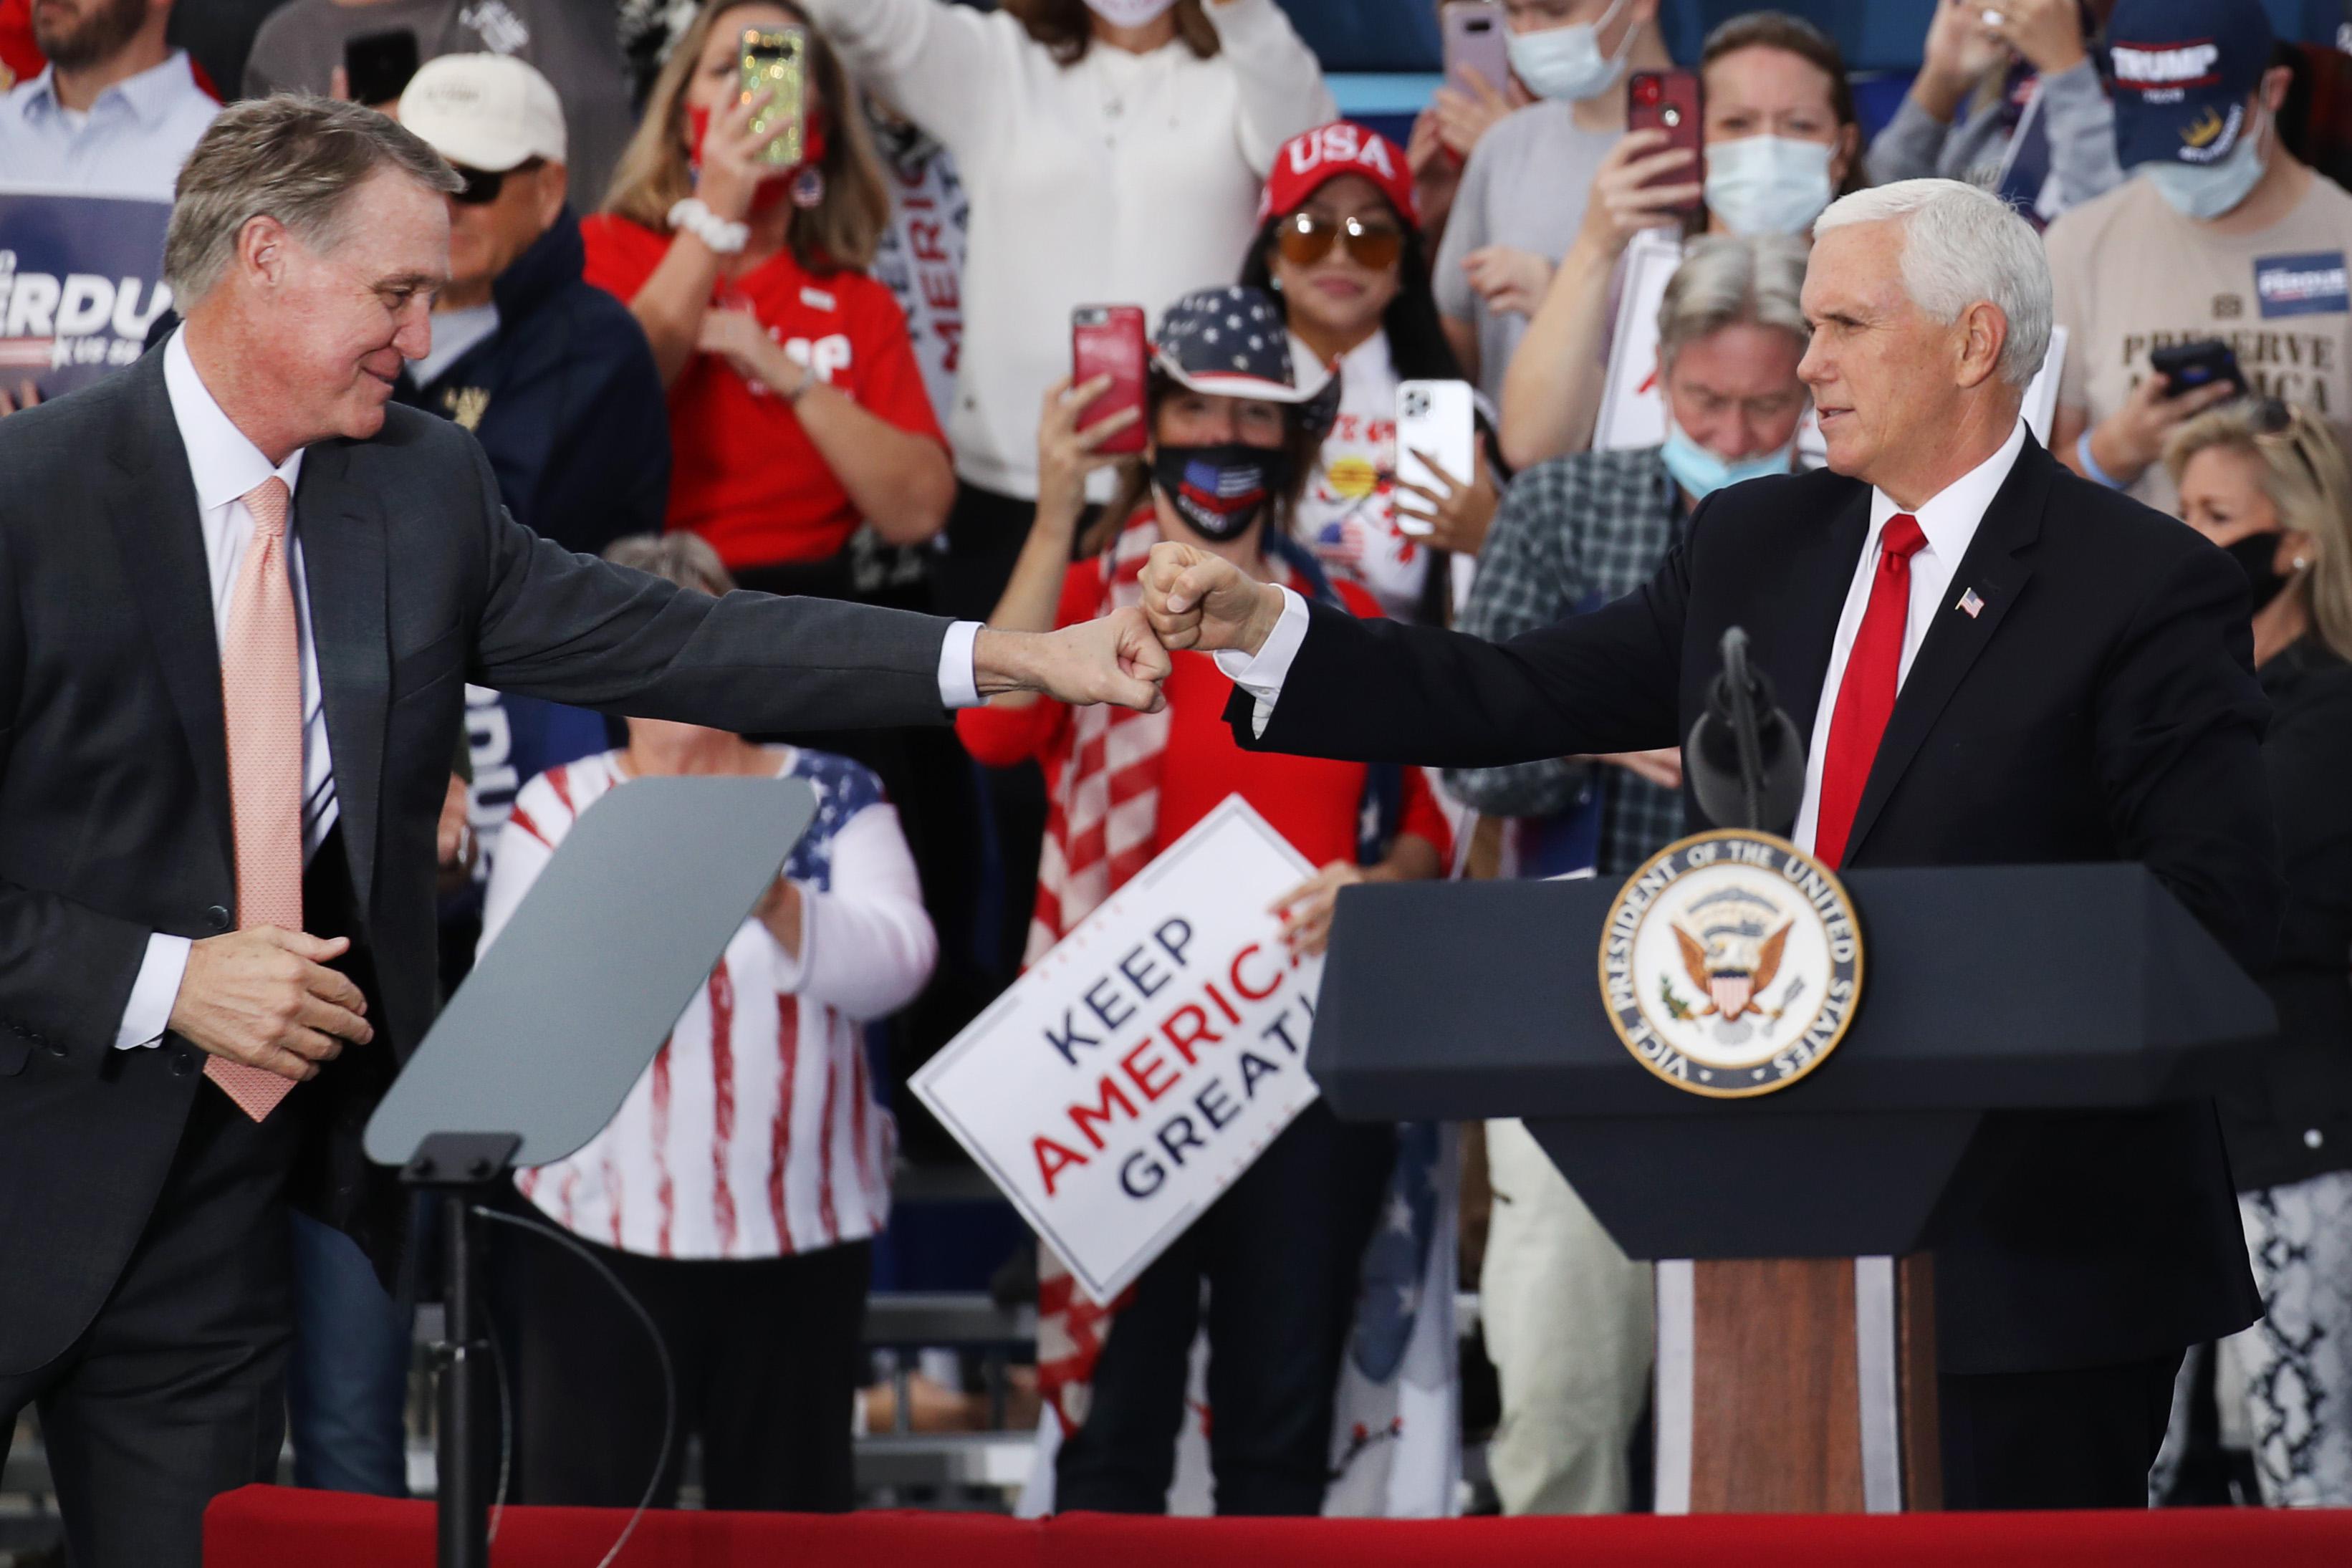 Pence and Perdue fist-bumping on stage